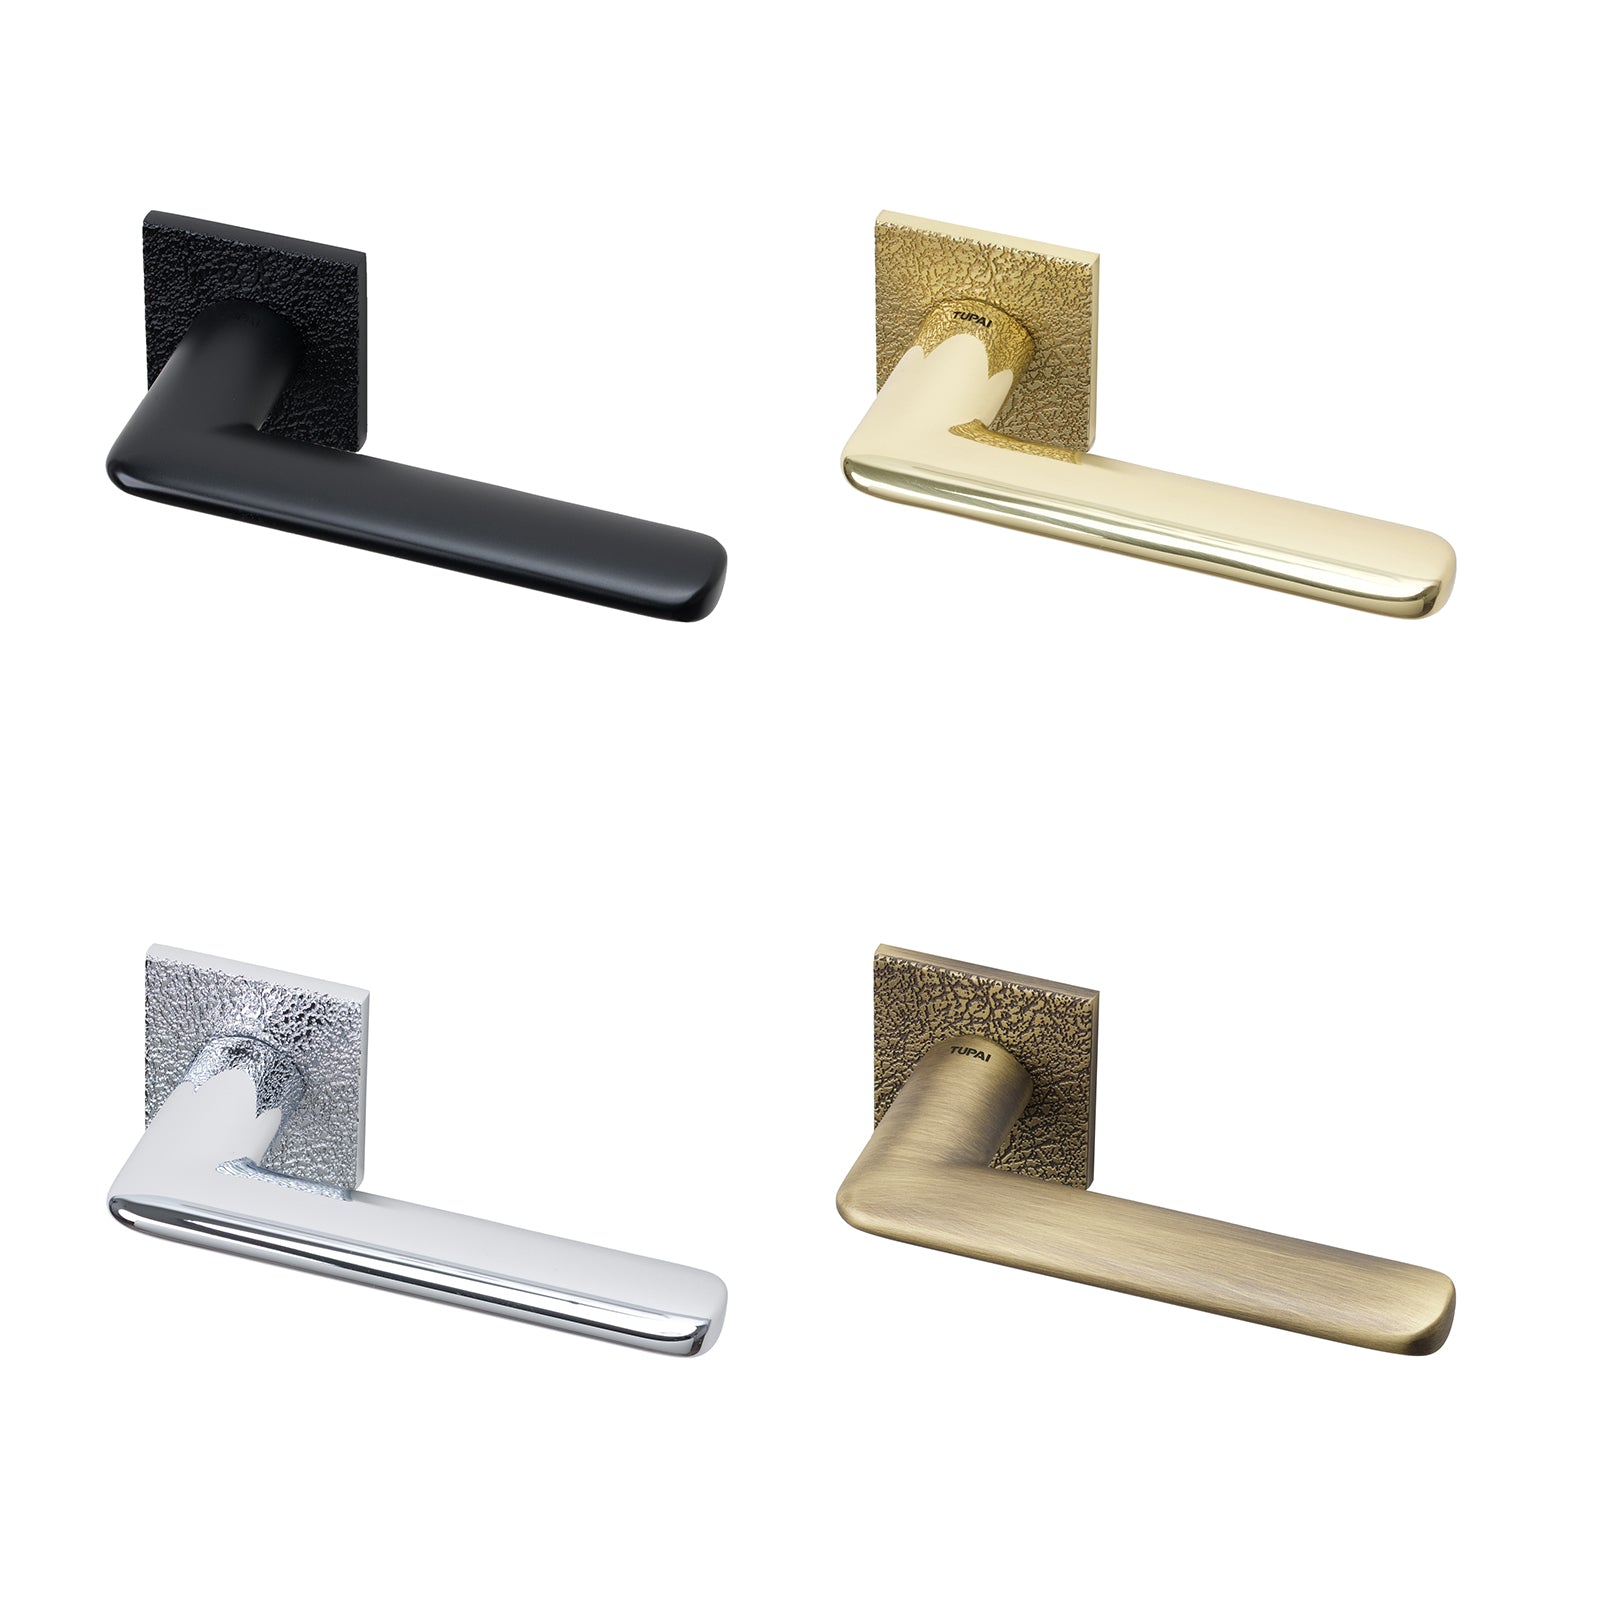 Tupai texture Edral lever on rose door handles in Leather finish with 6mm thick rose.